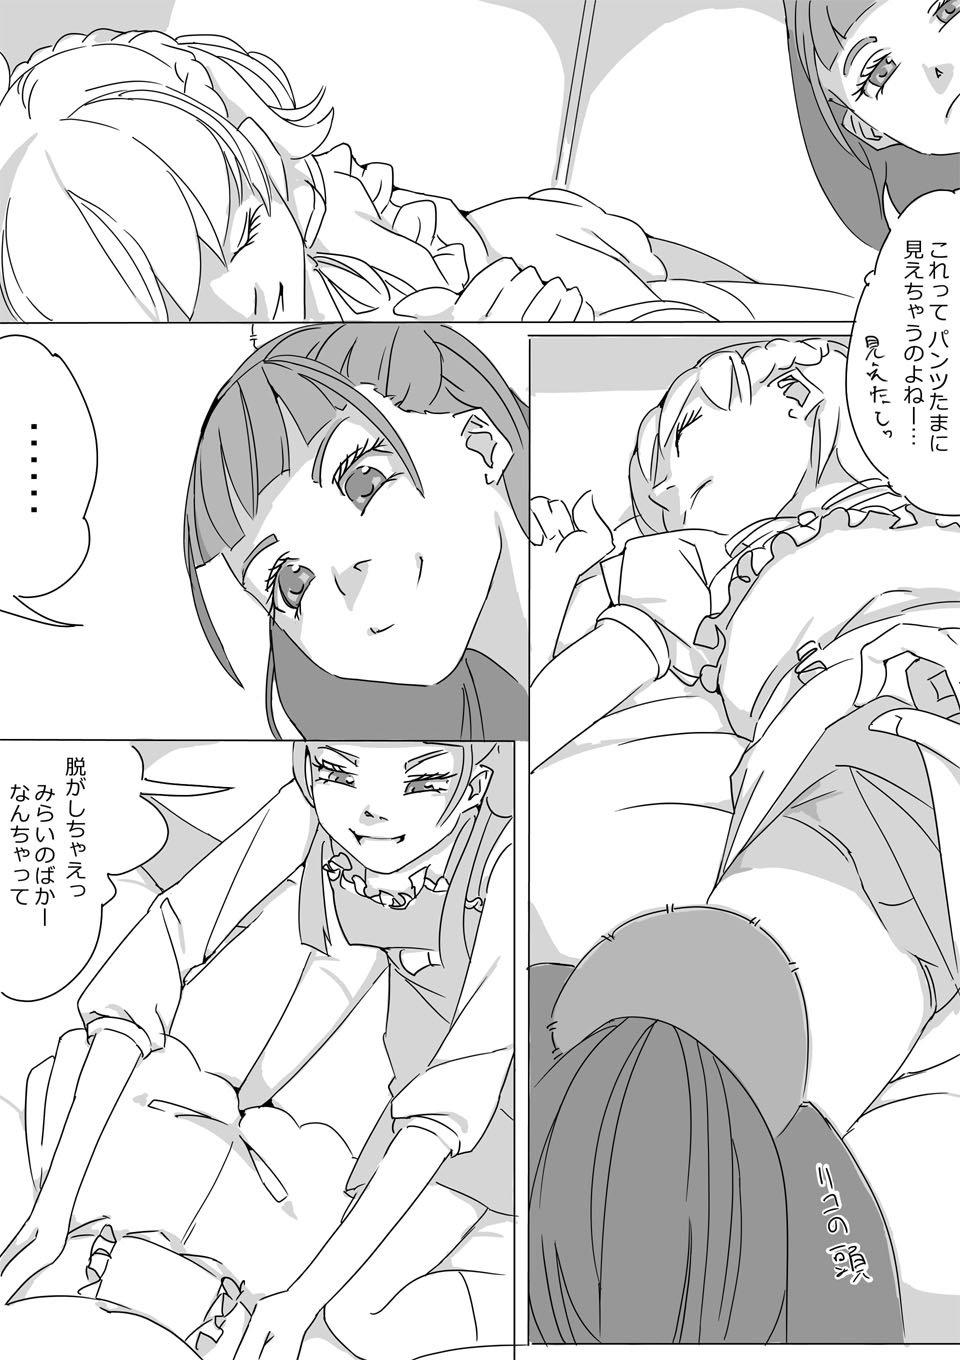 Milfs Untitled Precure Doujinshi - Maho girls precure Plump - Page 3